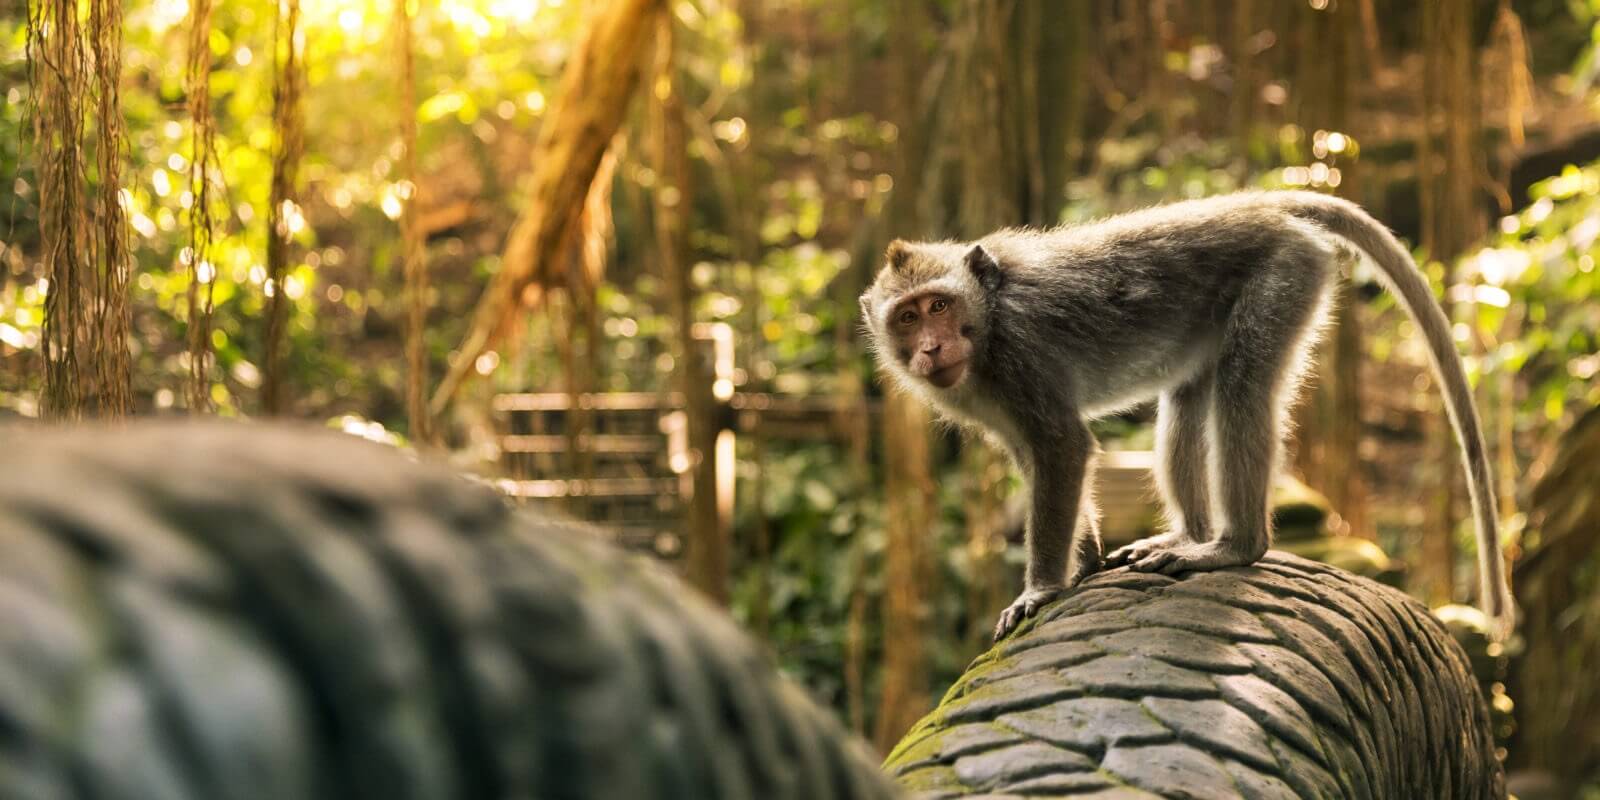 Get your visa to see the monkeys in Bali